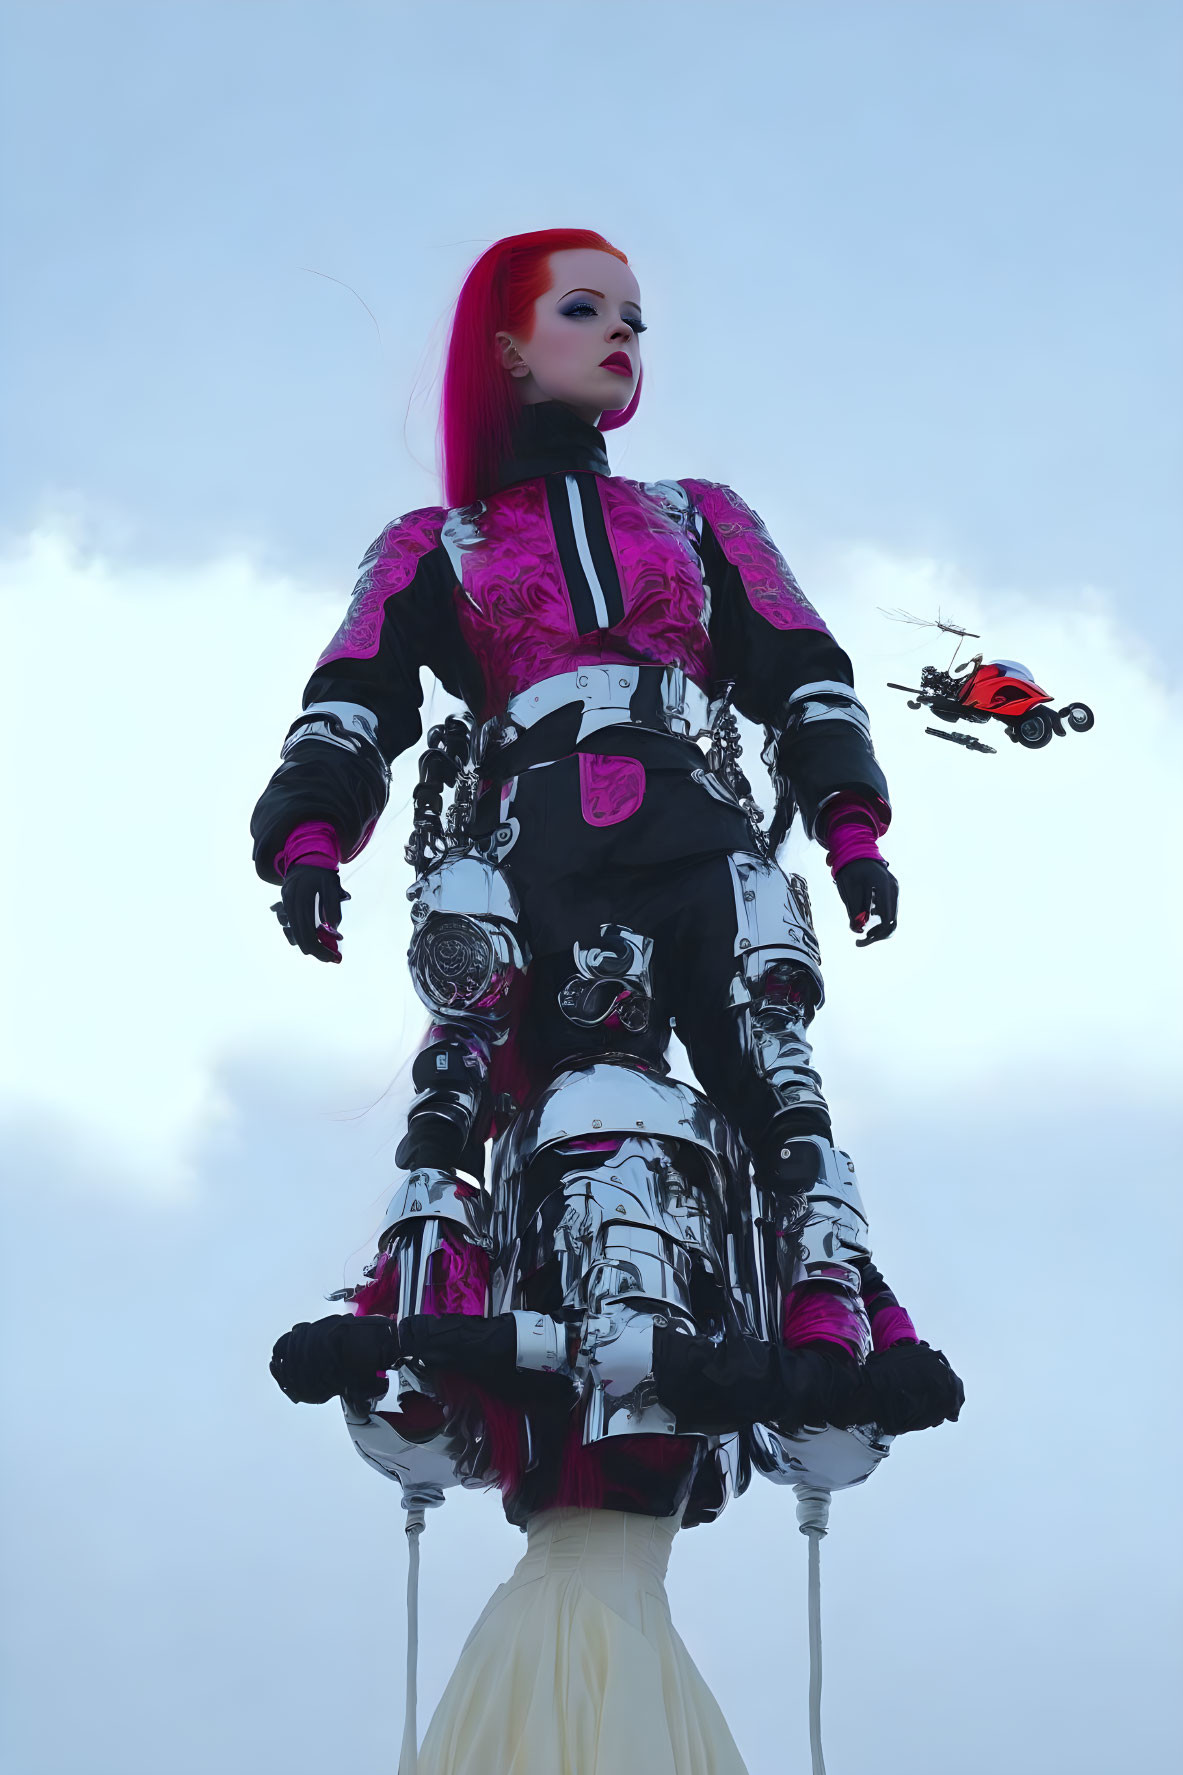 Vibrant red-haired person in dark makeup and metallic armor against sky with drone.